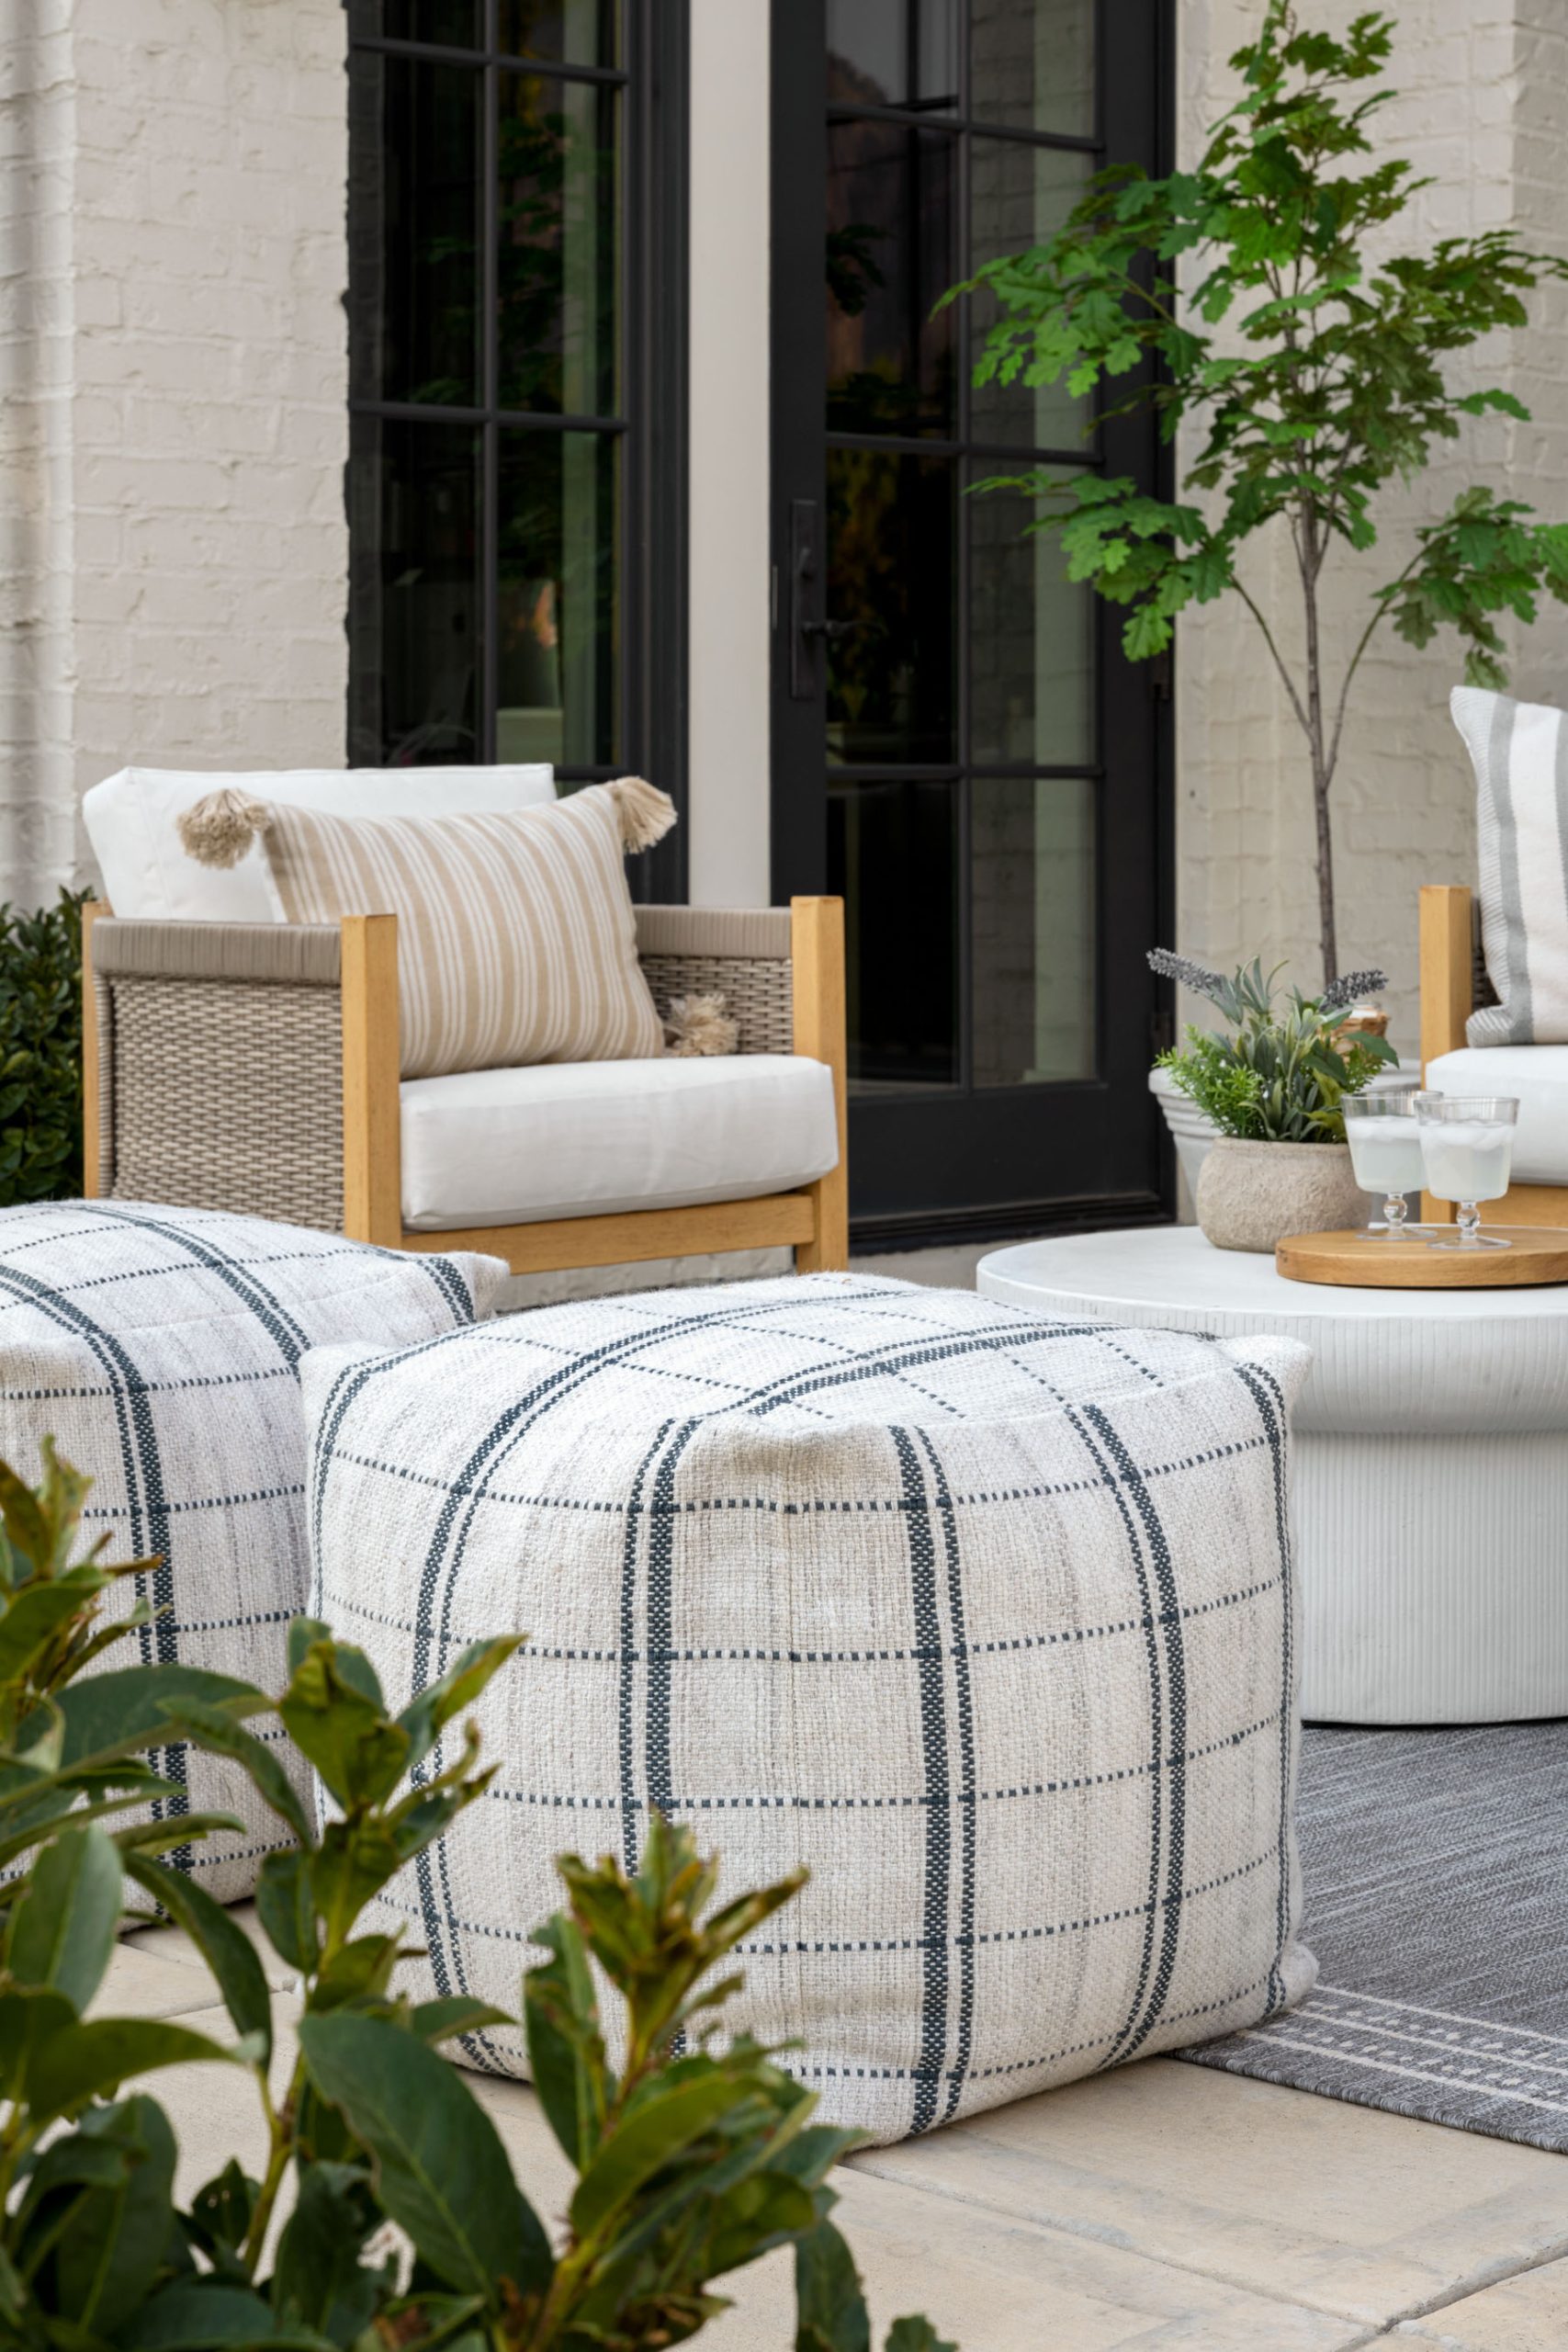 Patterned ottomans in outdoor living area